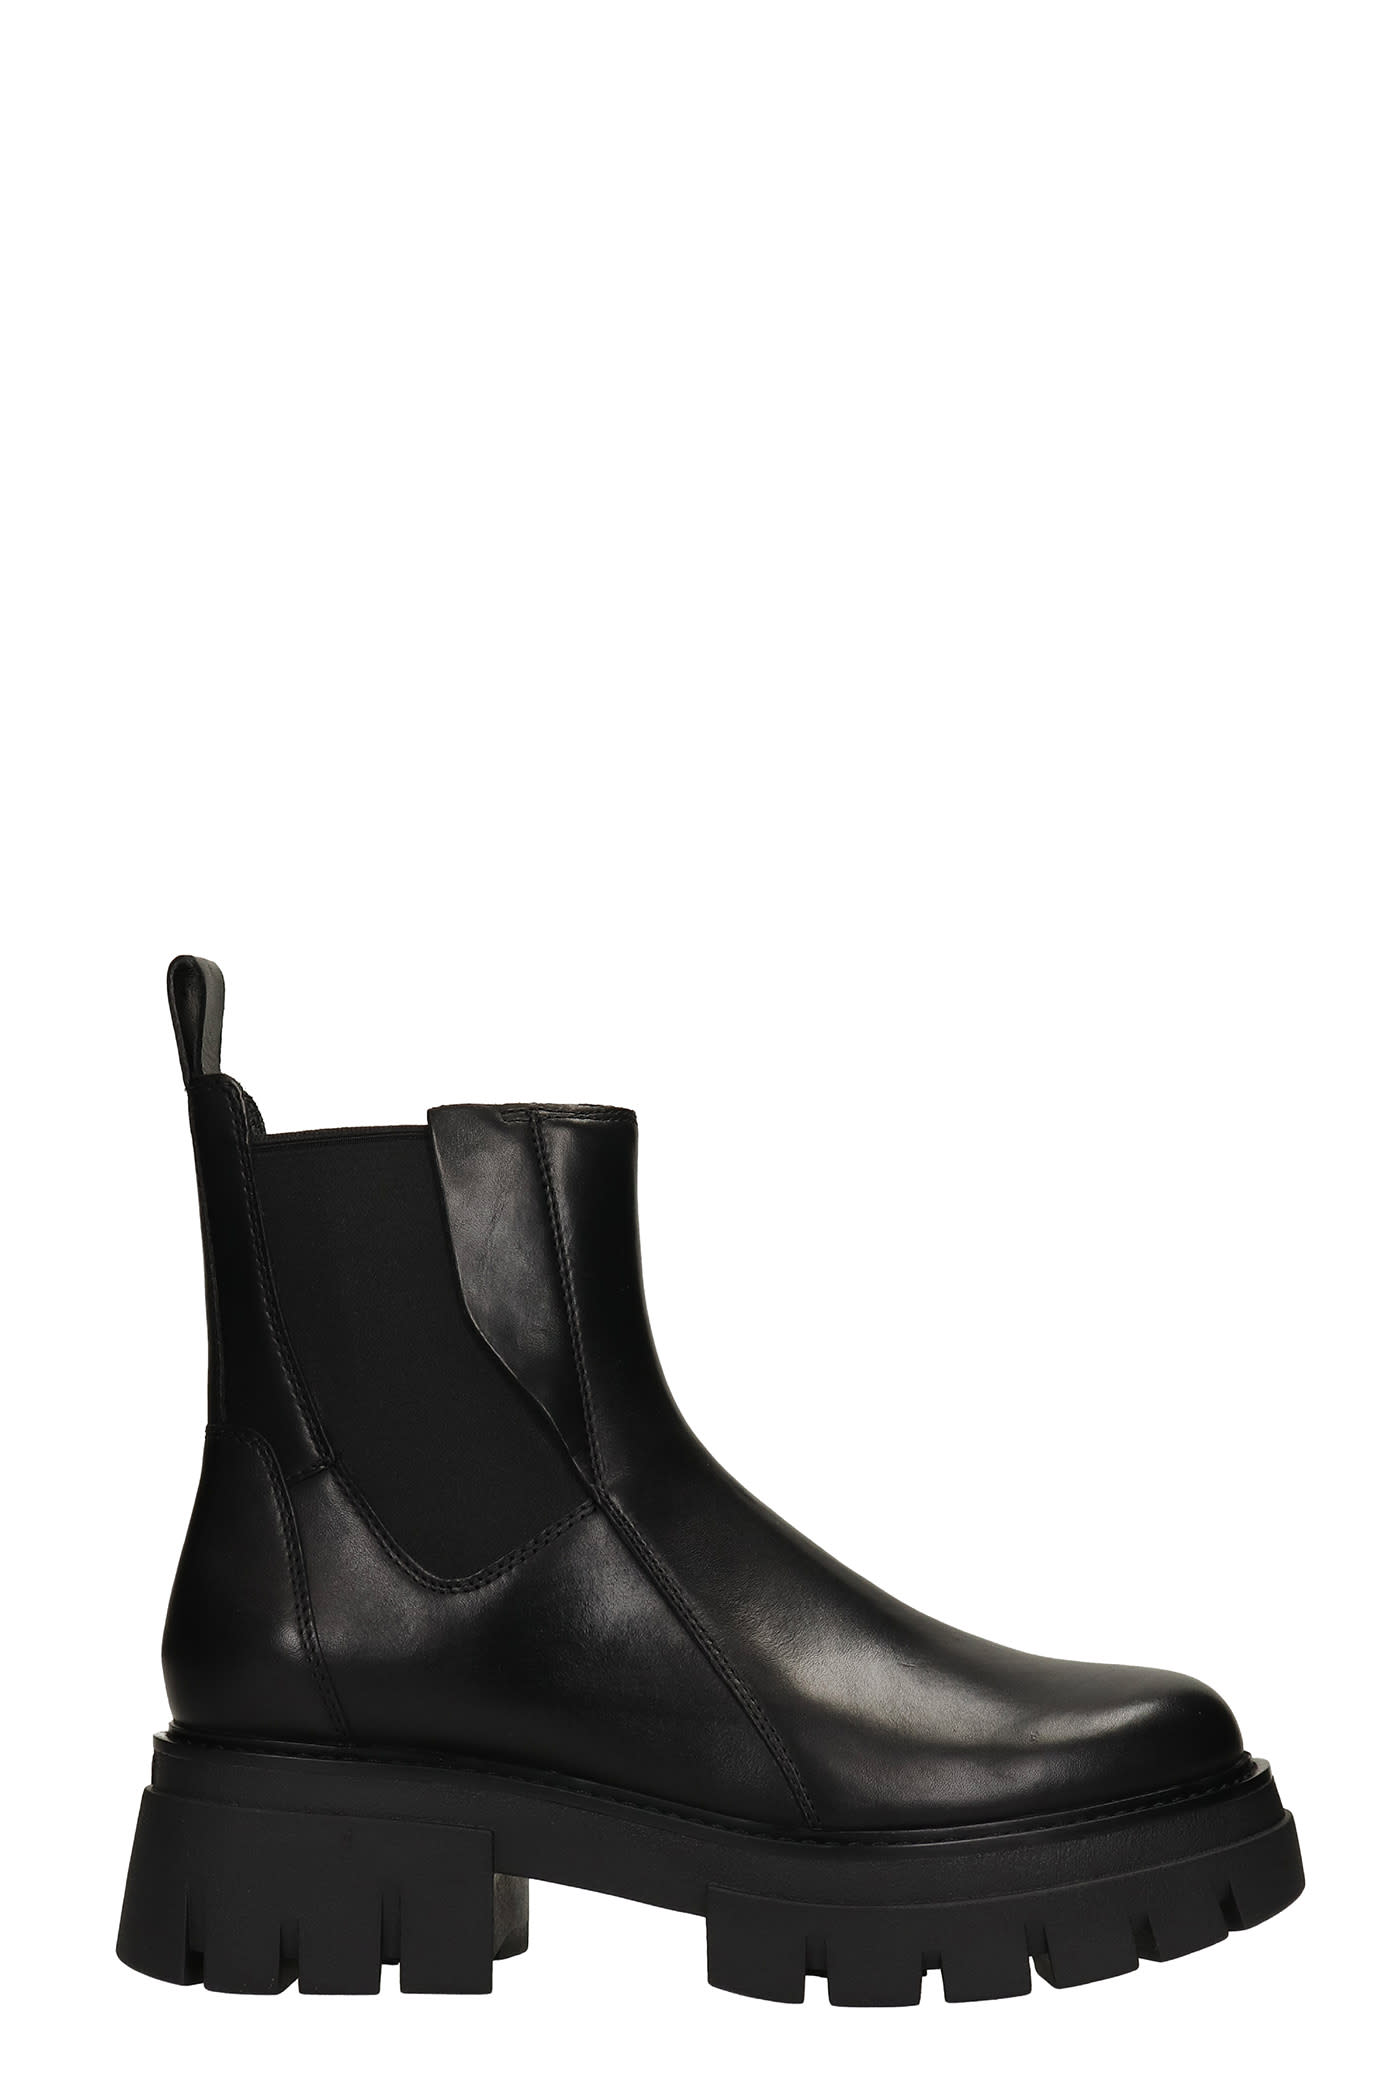 Ash Links Combat Boots In Black Leather